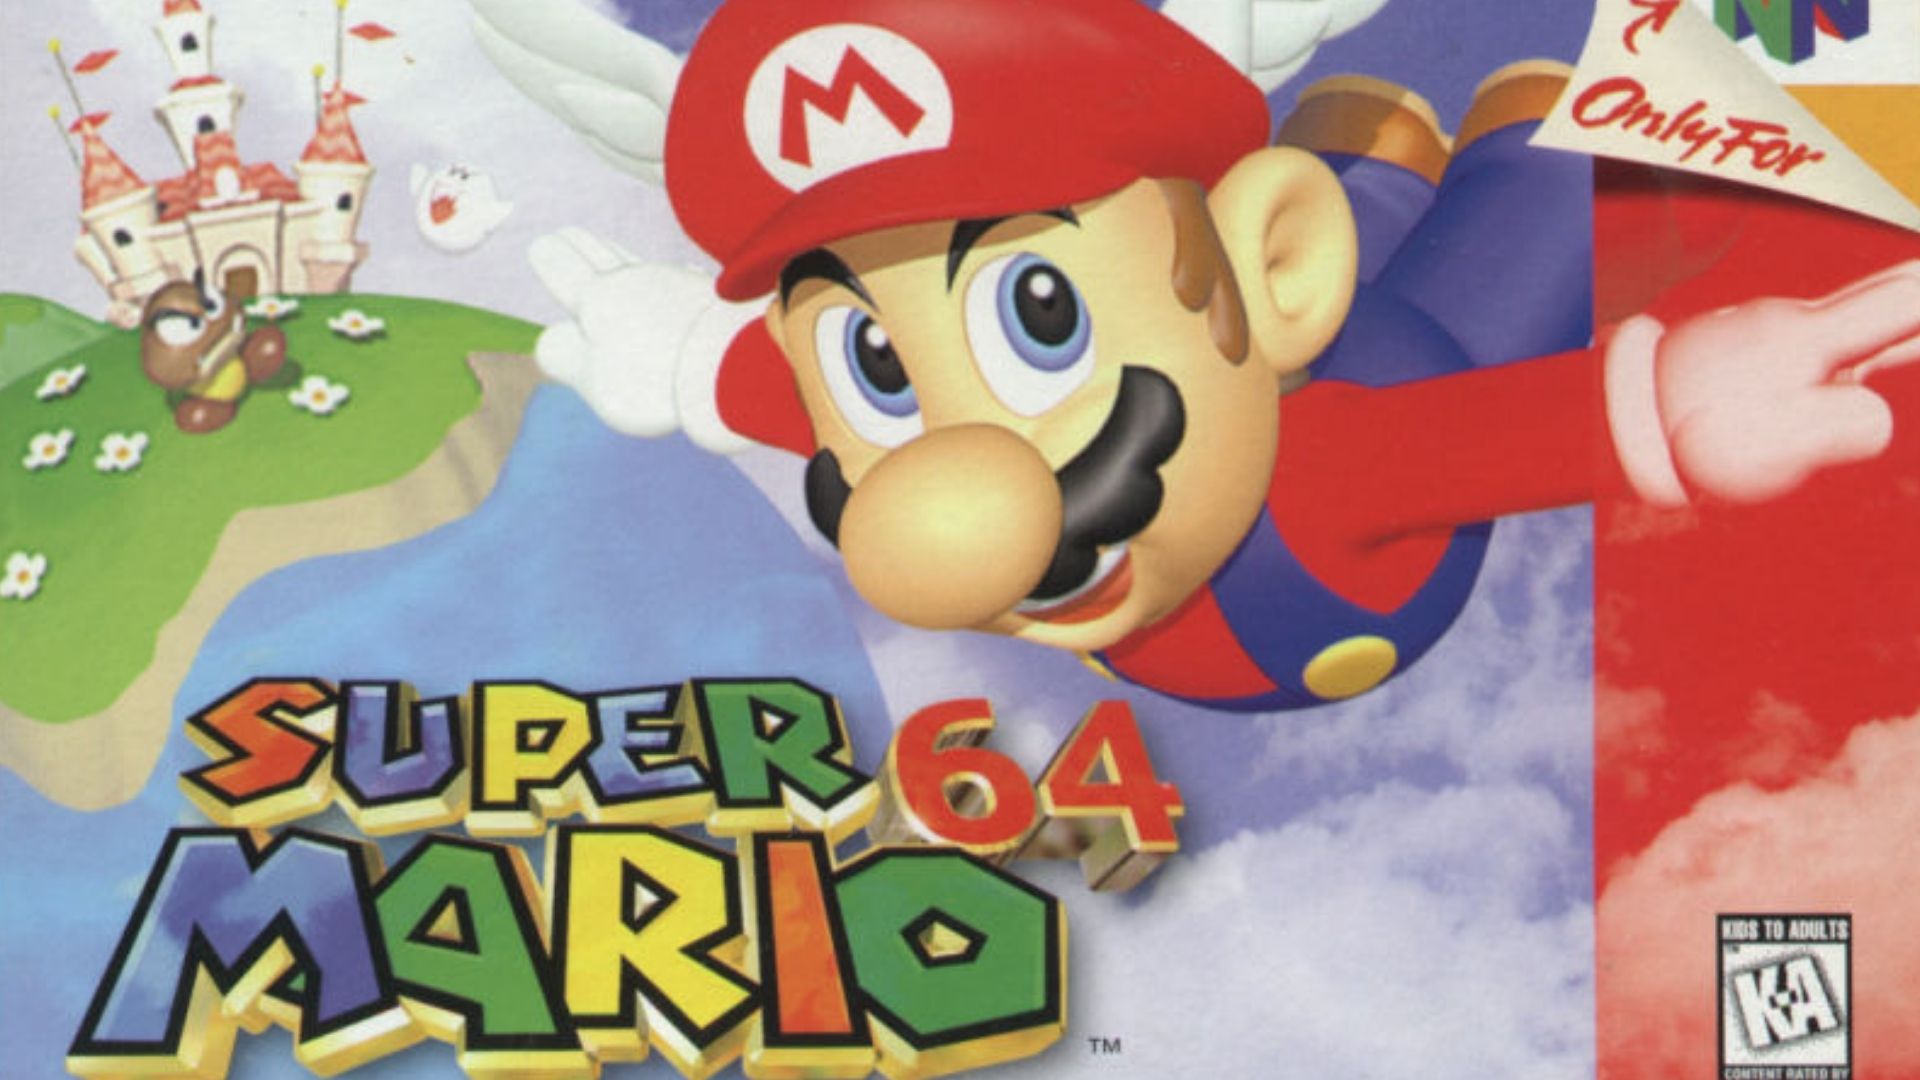 Nintendo 64 Games Reportedly Coming to Nintendo Switch Online